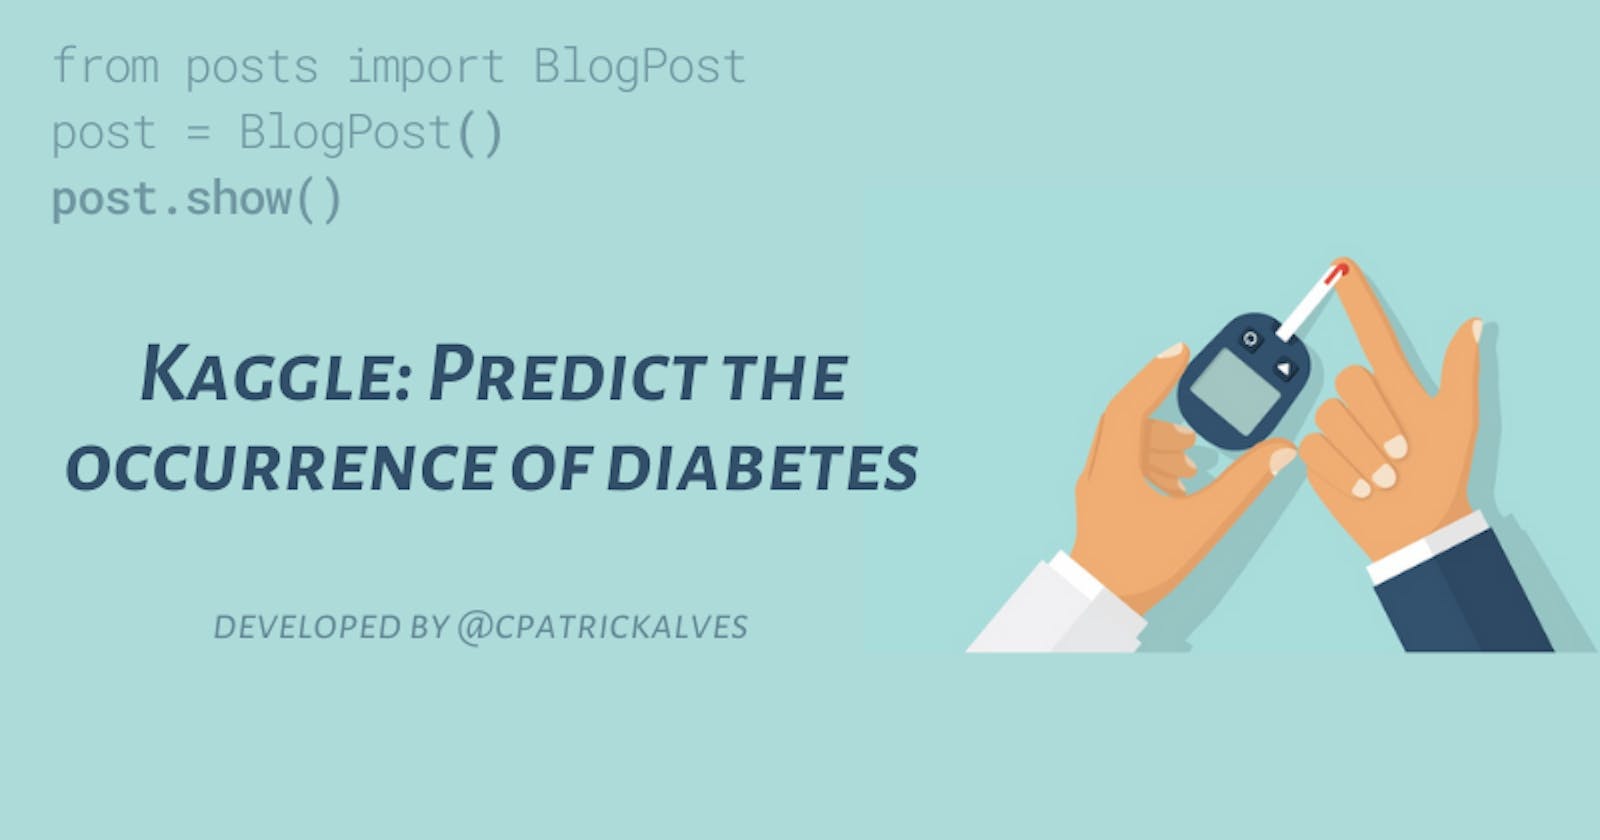 Kaggle: Predict the occurrence of diabetes